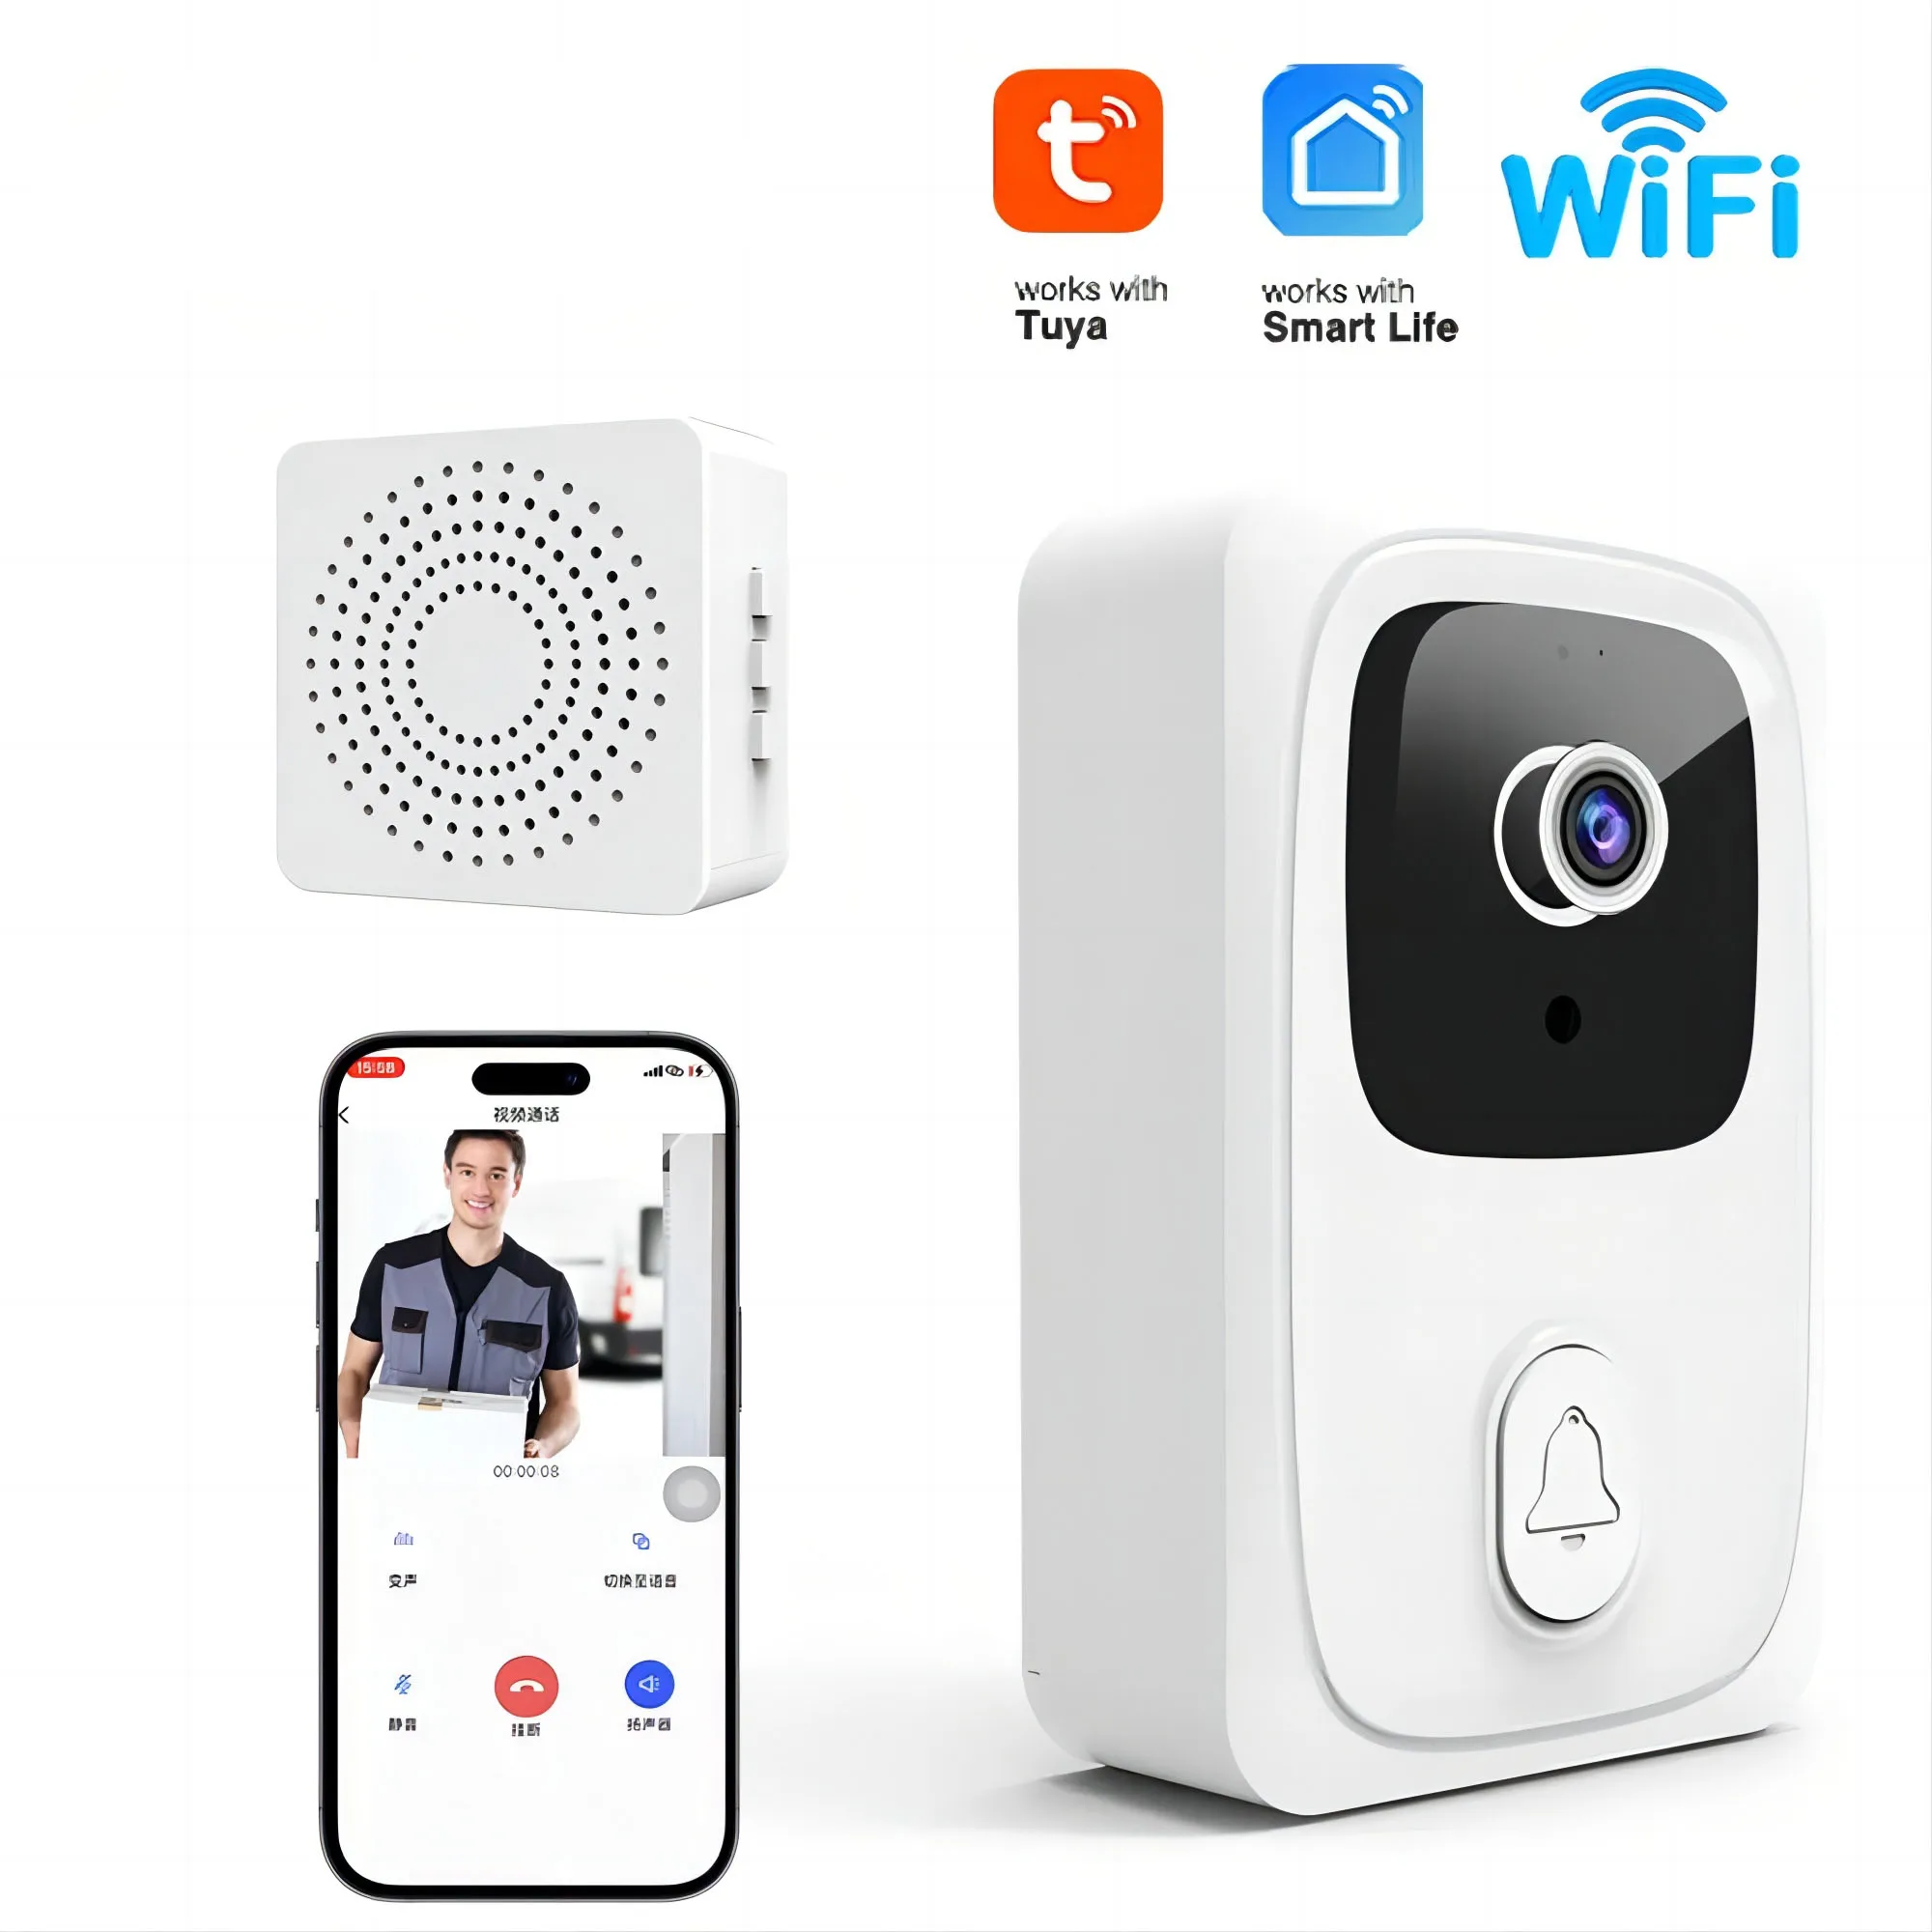 Tuya Video Doorbell Wireless WiFi Door Bell Camera Smart Home Security Night Vision Motion Detection Visual Intercom with Chime